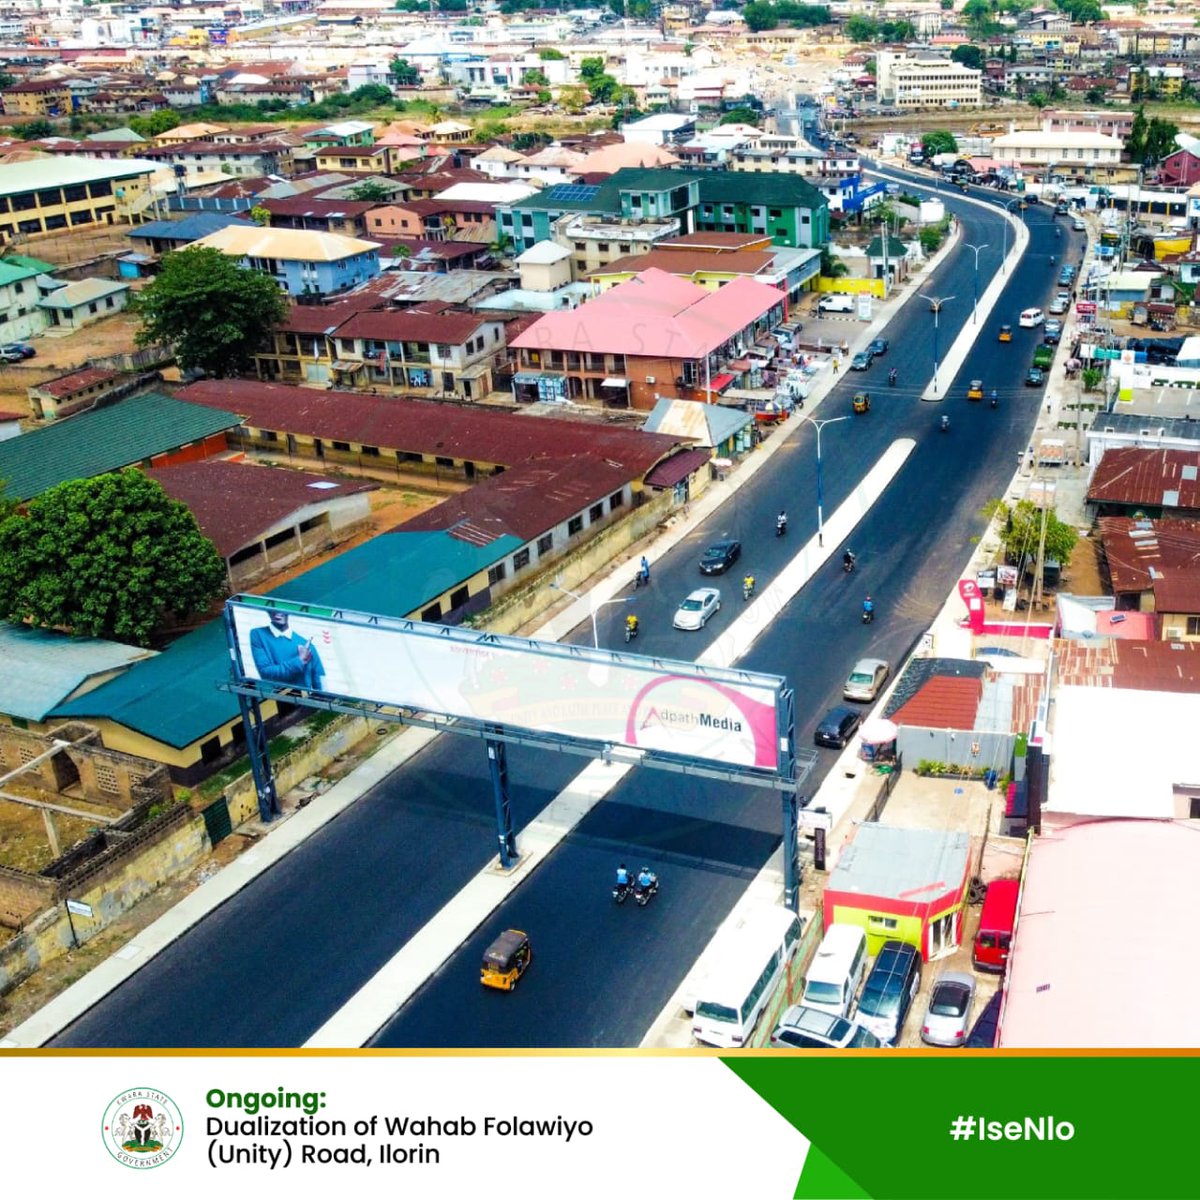 Ongoing: The dualization of Wahab Folawiyo (Unity) Road, Ilorin nears completion. The upgrading of the road exemplifies Governor @RealAARahman's dedication to urban renewal and infrastructure enhancement in Kwara State.